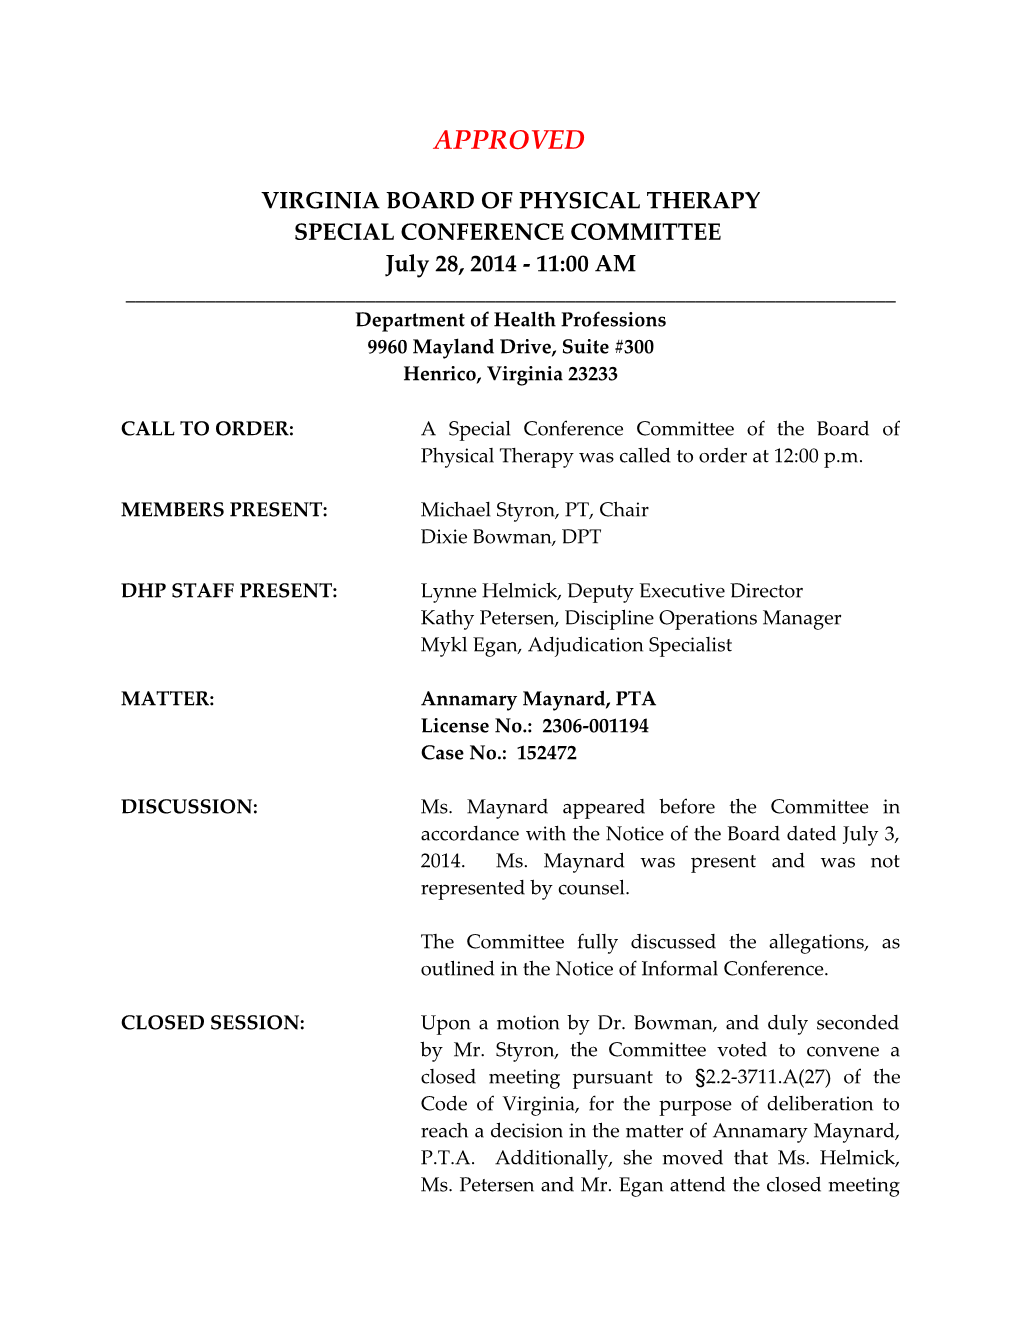 Virginia Board of Physical Therapy s1